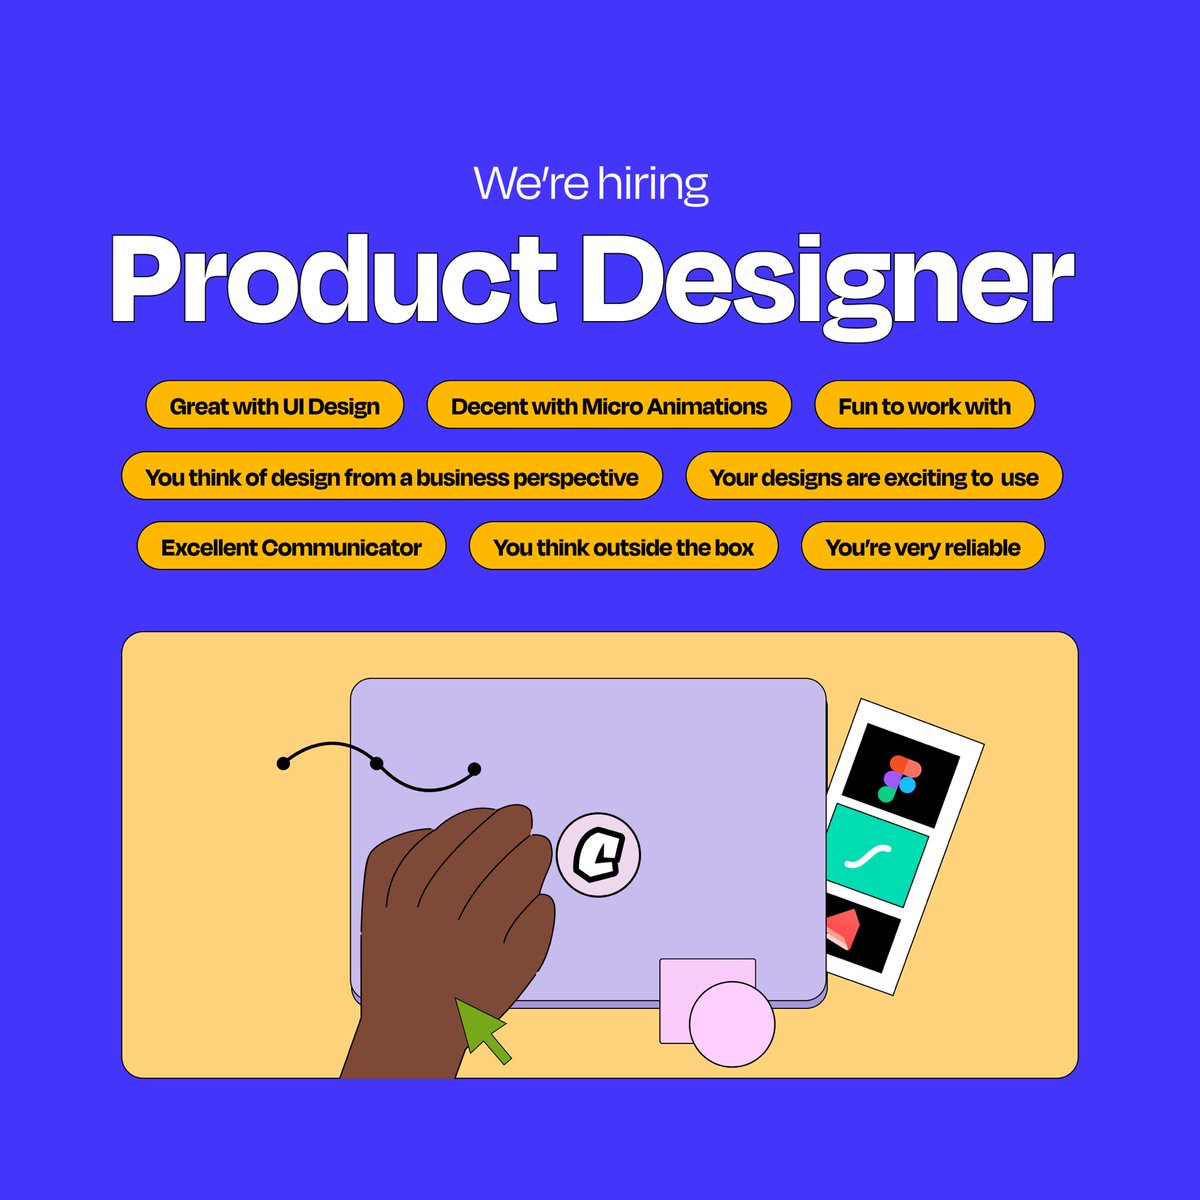 🔔We are hiring! Here is an opportunity to join our awesome team as a Product Designer😎 If you're passionate about crafting unforgettable experiences and designing delightful interfaces, this role is perfect for you! 💼 Apply here: bit.ly/3OB9gcc